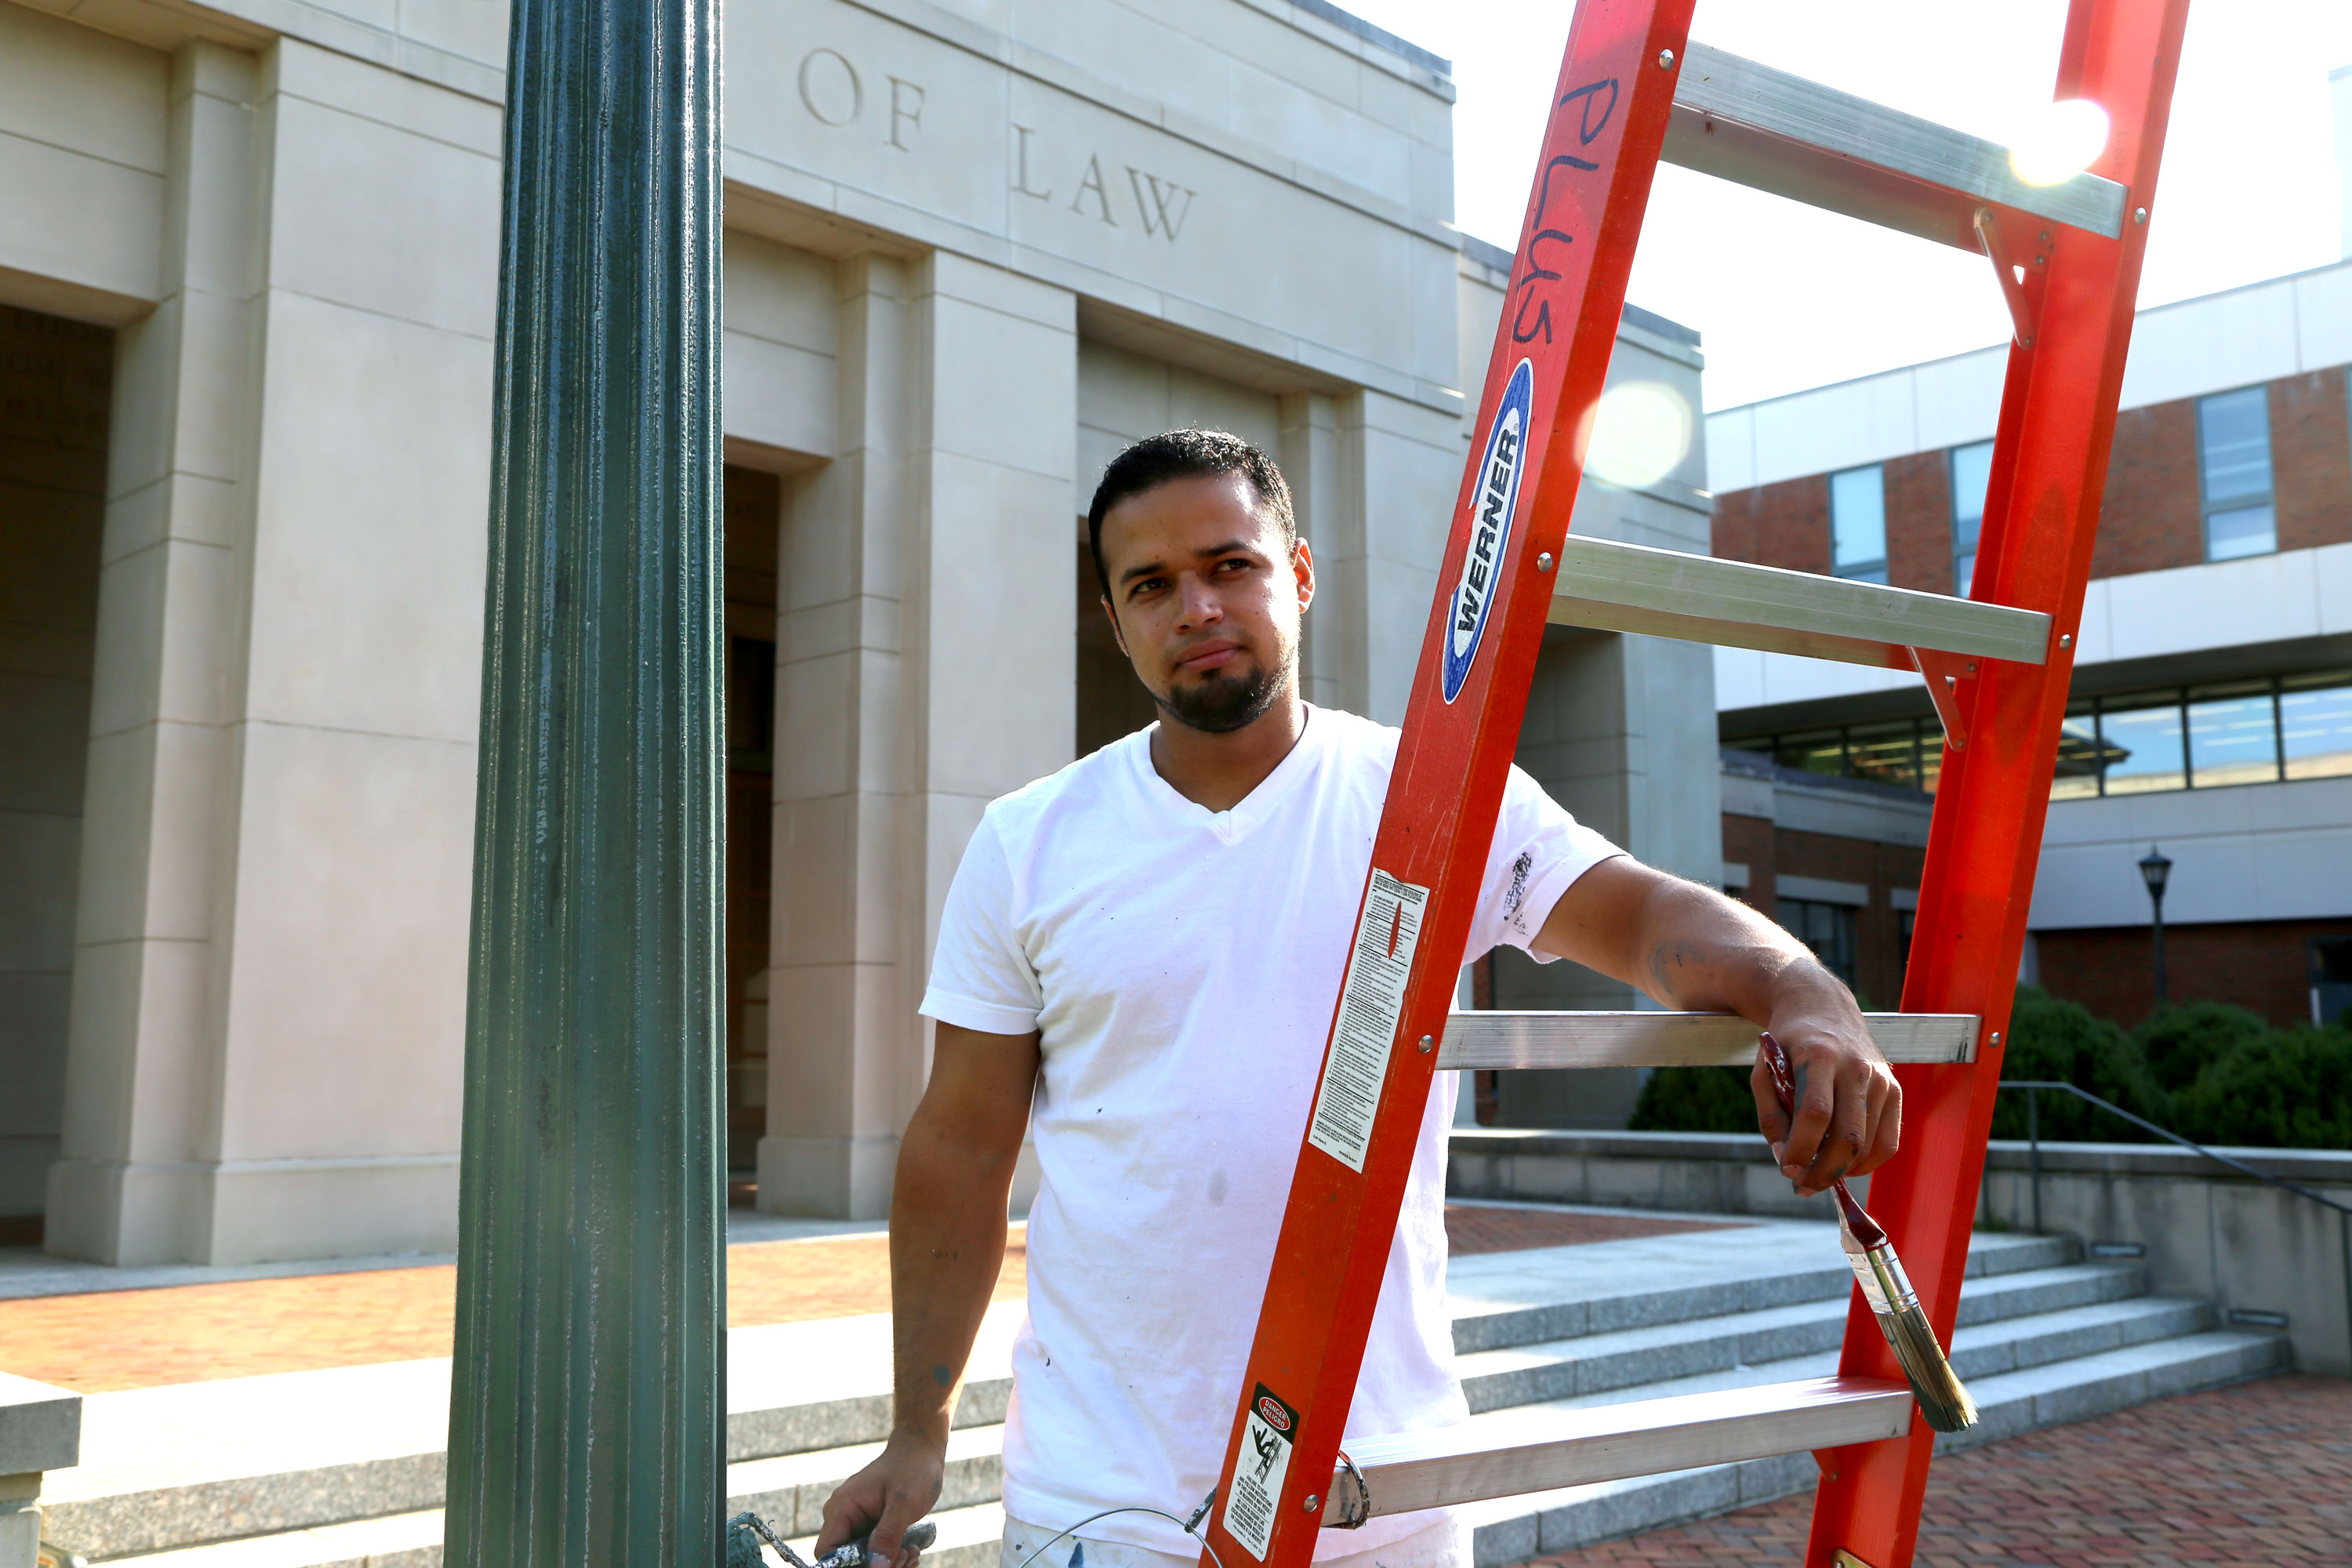 Man holding a ladder near a light pole in front of the school of lawn building looking at the camera